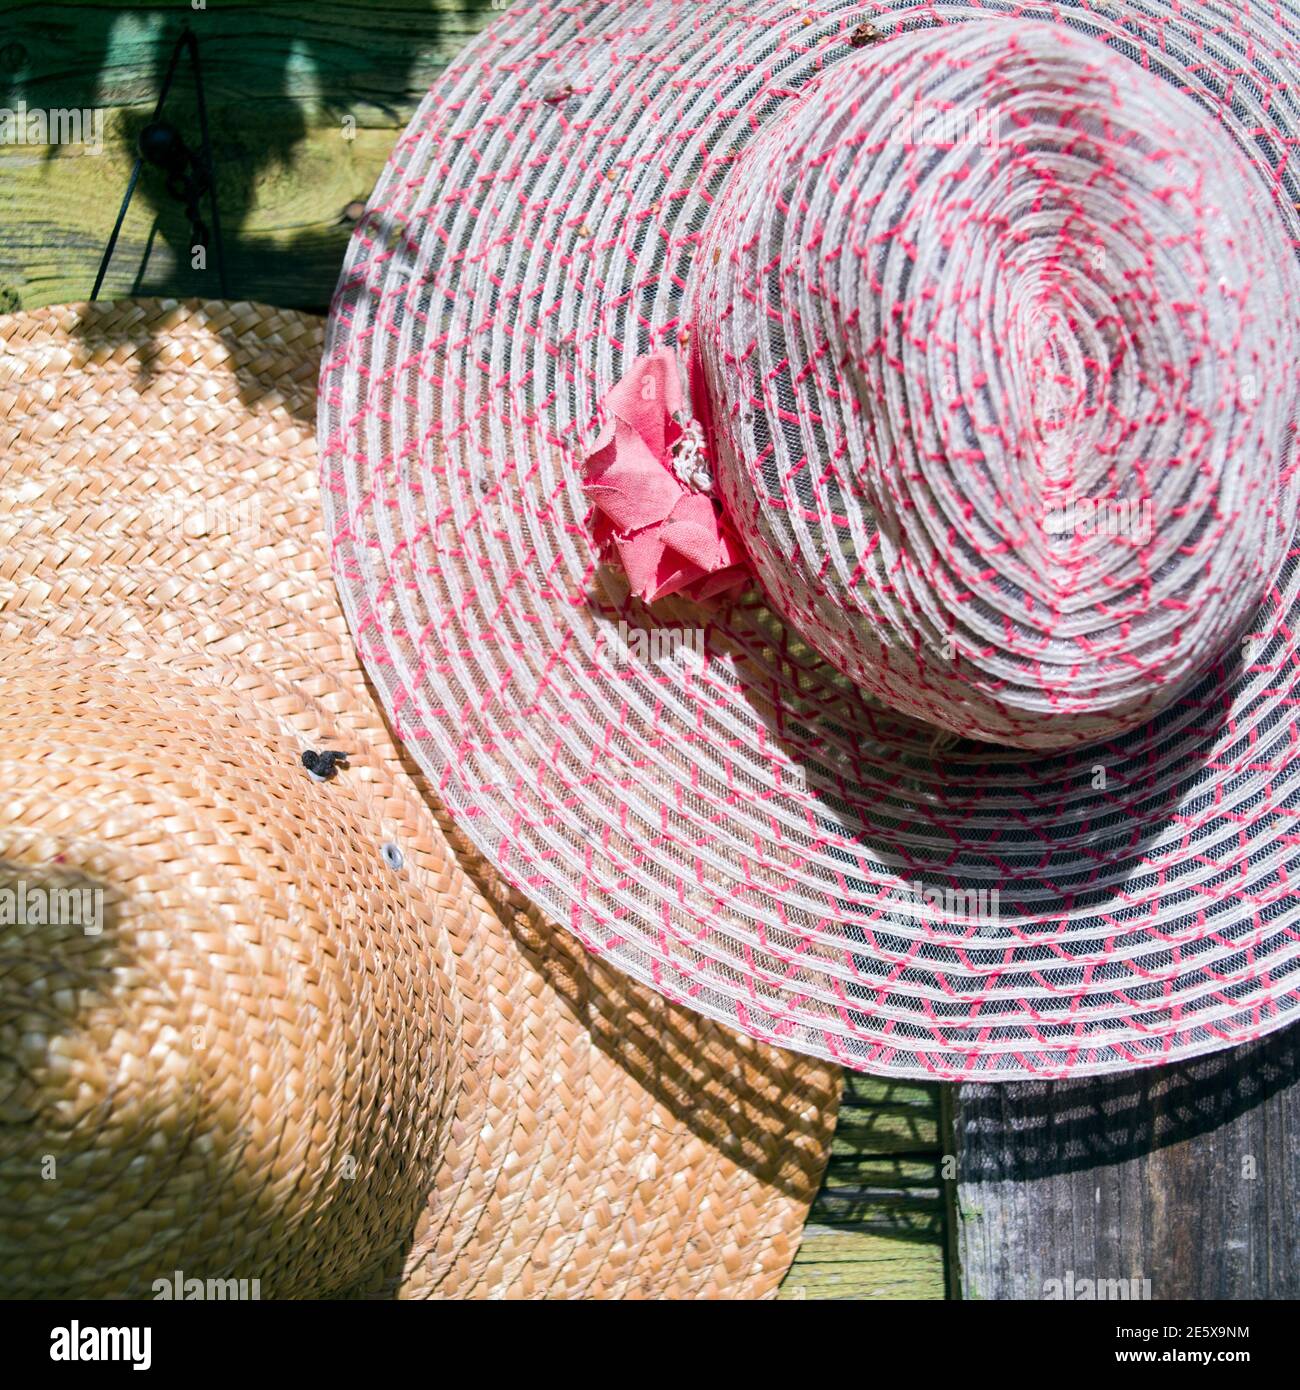 two wide brimmed hats, close up outdoor still life Stock Photo